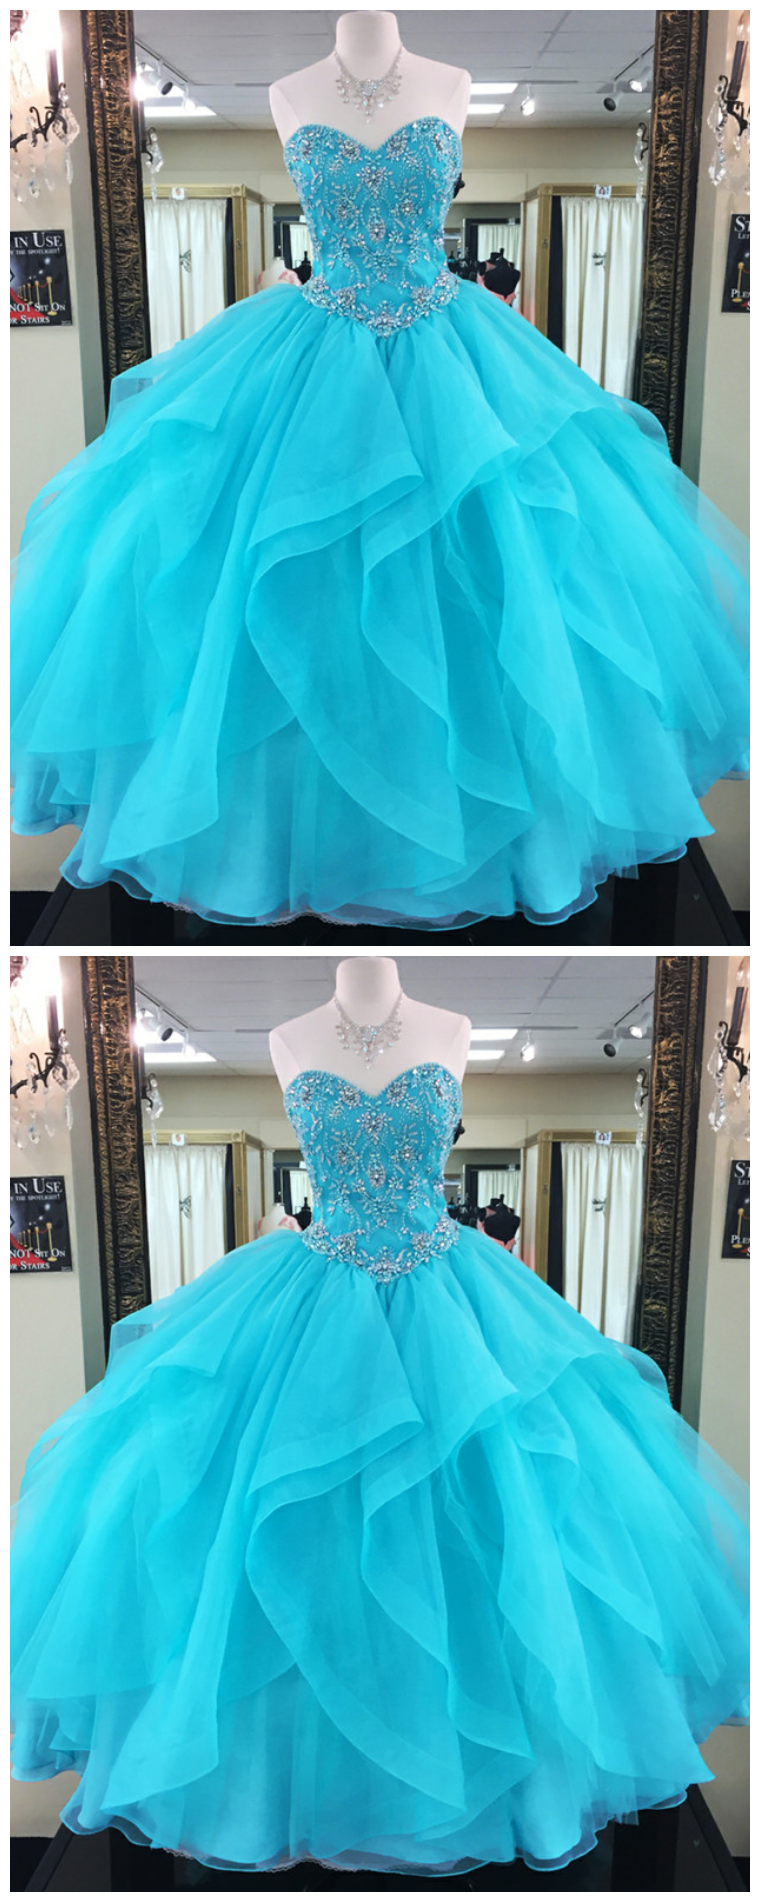 Turquoise Quinceanera Dresses,ball Gowns Prom Dresses,sweet 16 Dresses,elegant Quinceanera Dresses